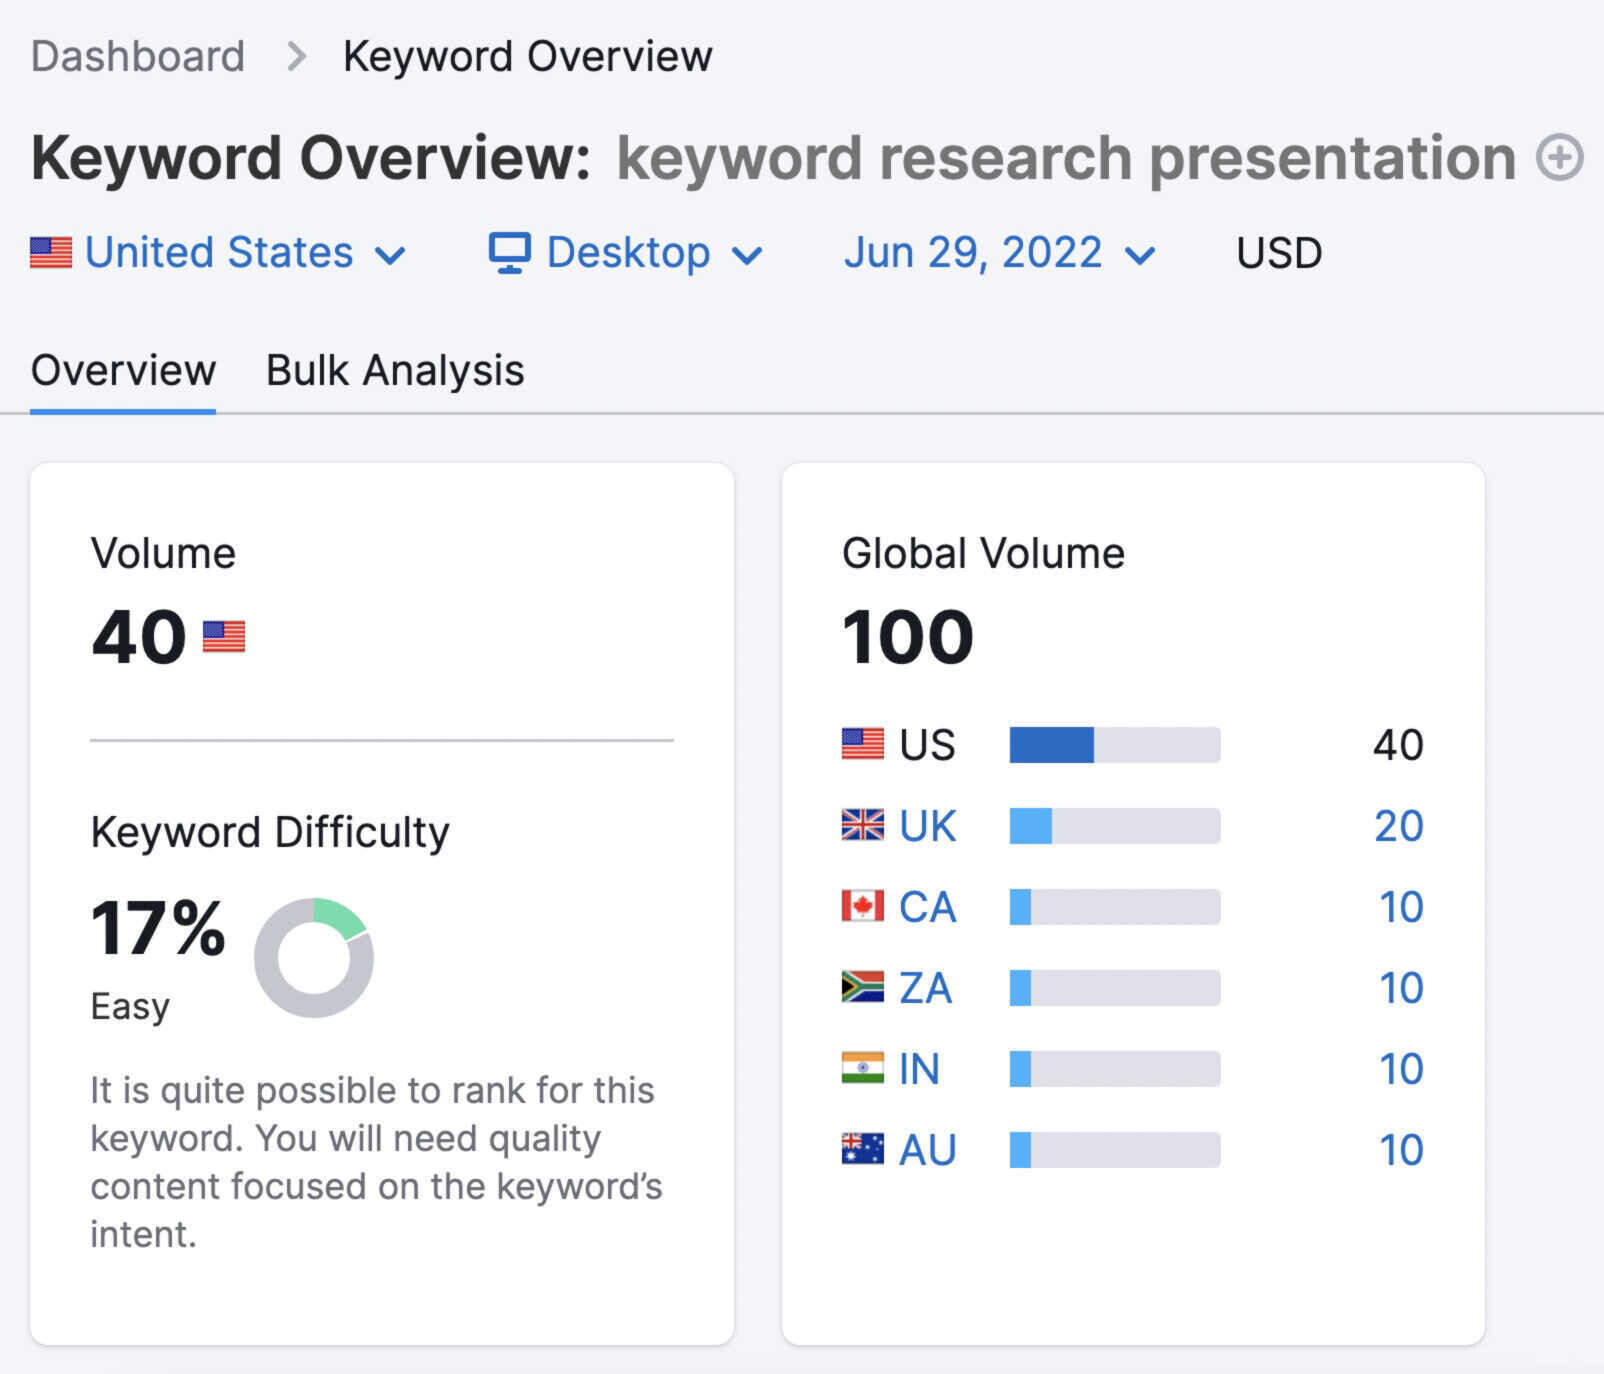 Keyword Overview results for "keyword research presentation"